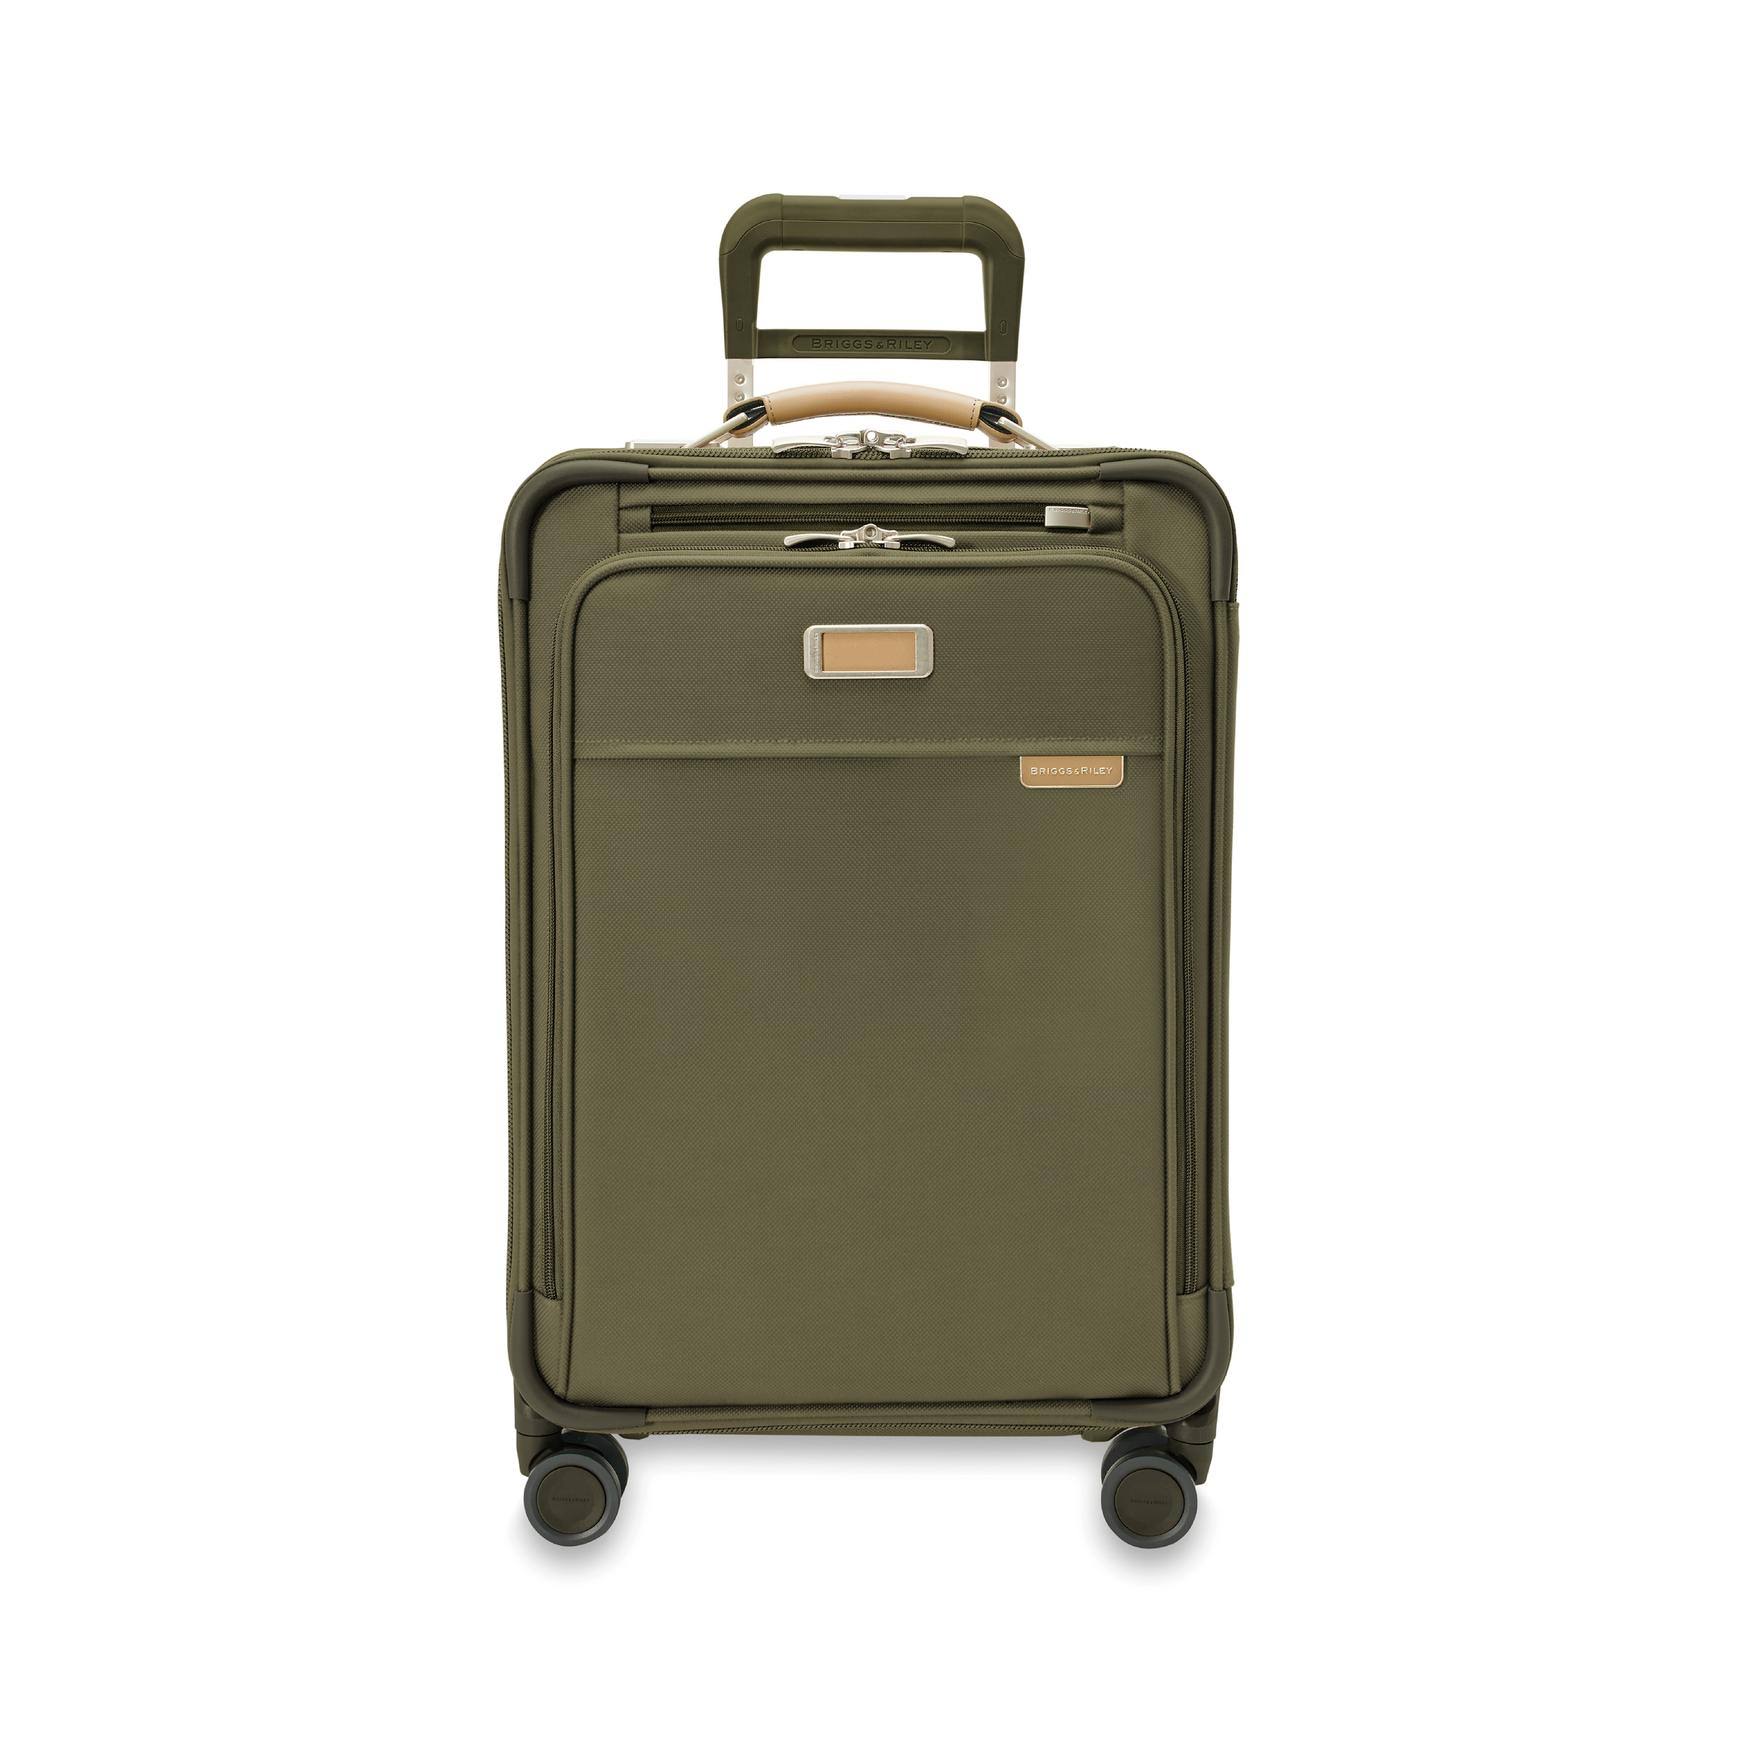 Briggs & Riley 4 Wheel Expandable Spinner Suitcases